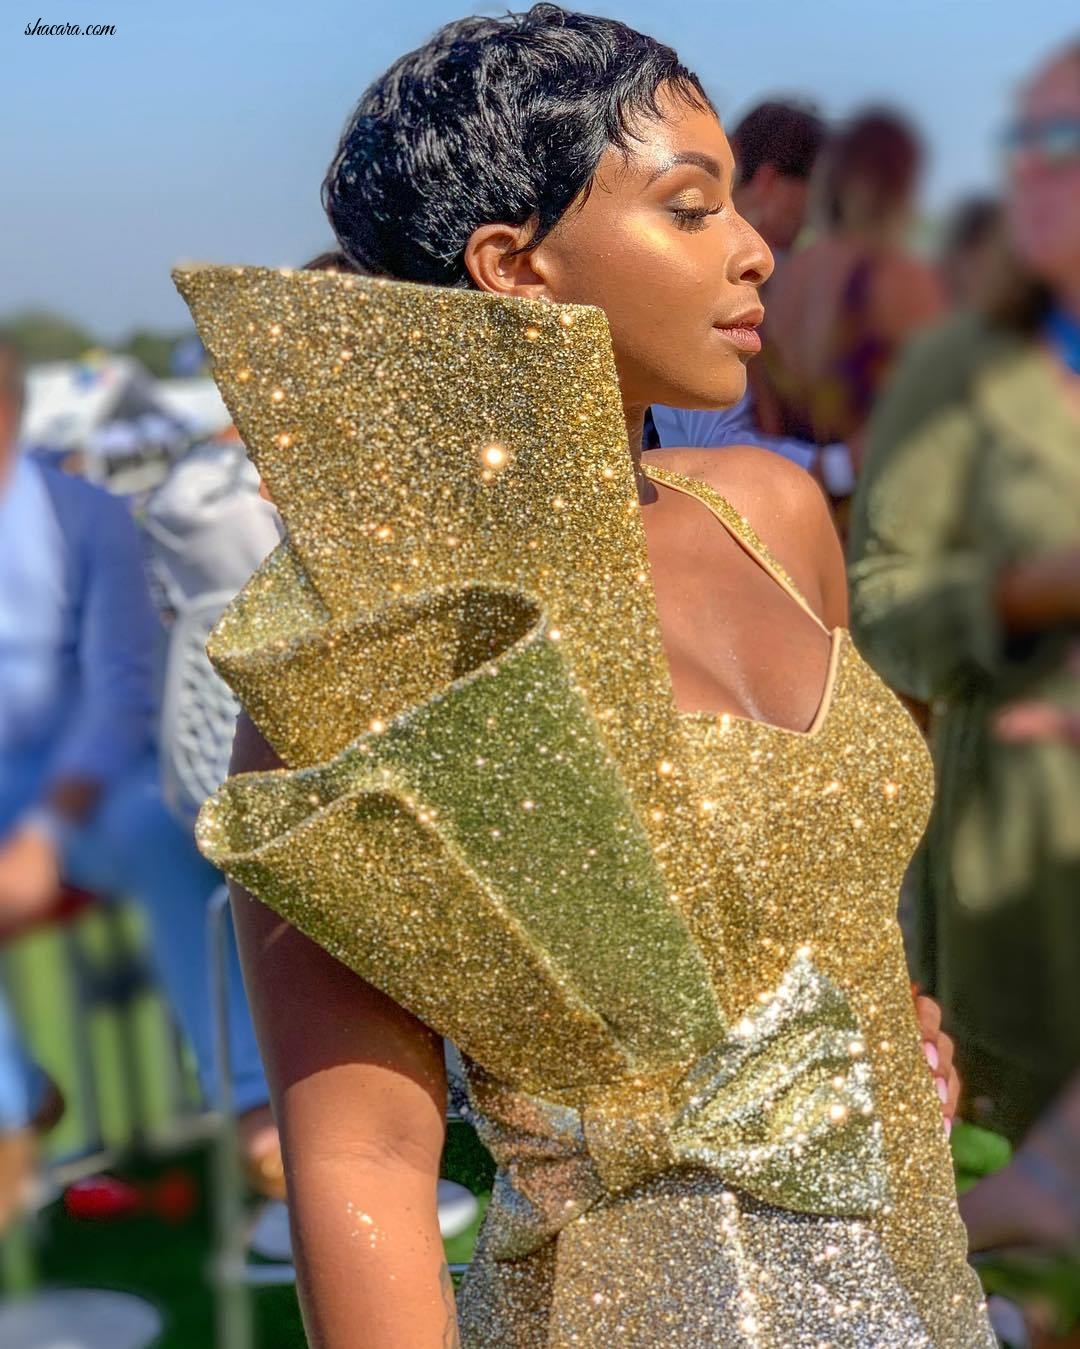 #SunMet2019: See The Best African Luxury Looks For The Glamorous Event